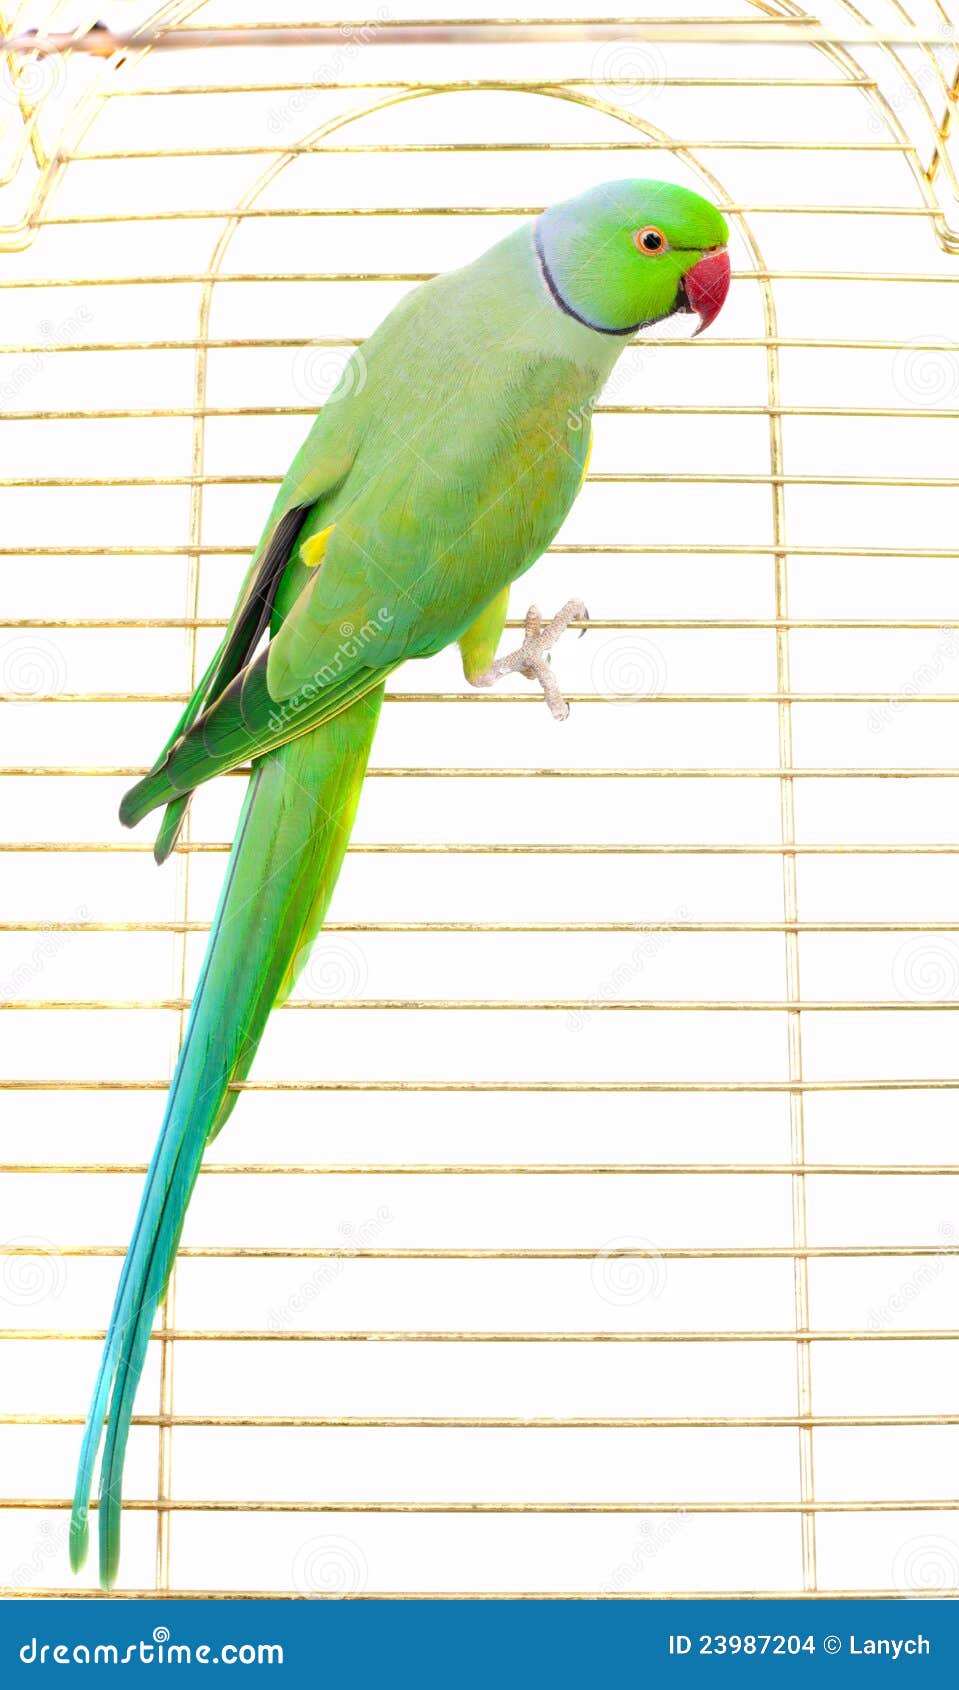 Big green parrot stock photo. Image of isolated, colorful - 23987204